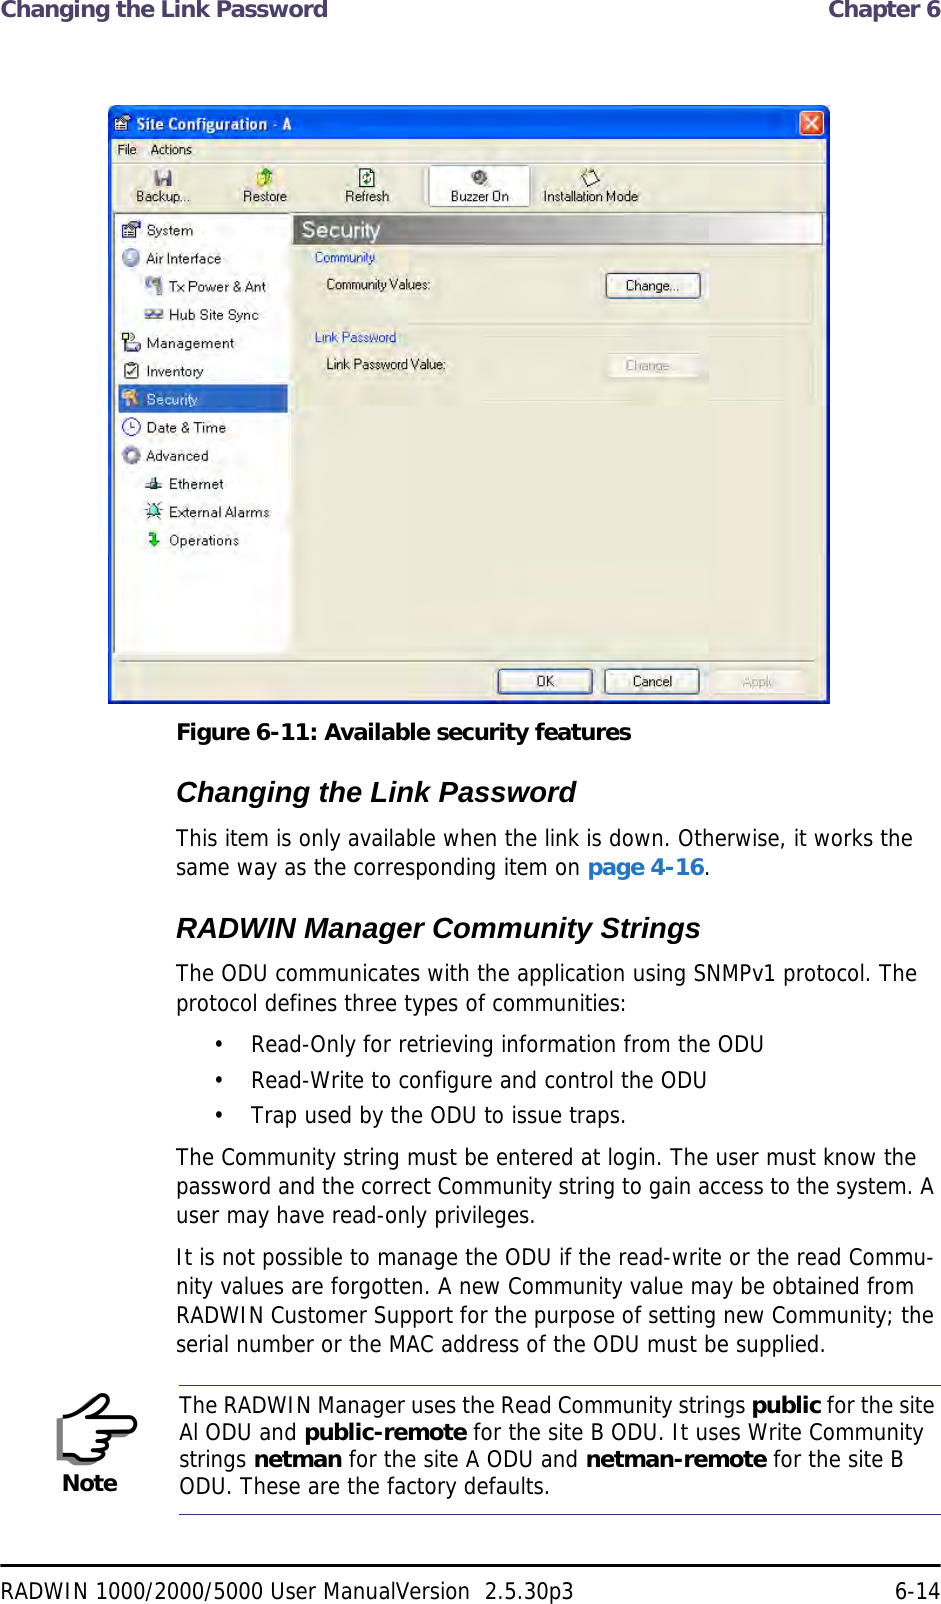 Changing the Link Password  Chapter 6RADWIN 1000/2000/5000 User ManualVersion  2.5.30p3 6-14 Figure 6-11: Available security featuresChanging the Link PasswordThis item is only available when the link is down. Otherwise, it works the same way as the corresponding item on page 4-16.RADWIN Manager Community StringsThe ODU communicates with the application using SNMPv1 protocol. The protocol defines three types of communities:• Read-Only for retrieving information from the ODU• Read-Write to configure and control the ODU• Trap used by the ODU to issue traps.The Community string must be entered at login. The user must know the password and the correct Community string to gain access to the system. A user may have read-only privileges.It is not possible to manage the ODU if the read-write or the read Commu-nity values are forgotten. A new Community value may be obtained from RADWIN Customer Support for the purpose of setting new Community; the serial number or the MAC address of the ODU must be supplied.NoteThe RADWIN Manager uses the Read Community strings public for the site Al ODU and public-remote for the site B ODU. It uses Write Community strings netman for the site A ODU and netman-remote for the site B ODU. These are the factory defaults.